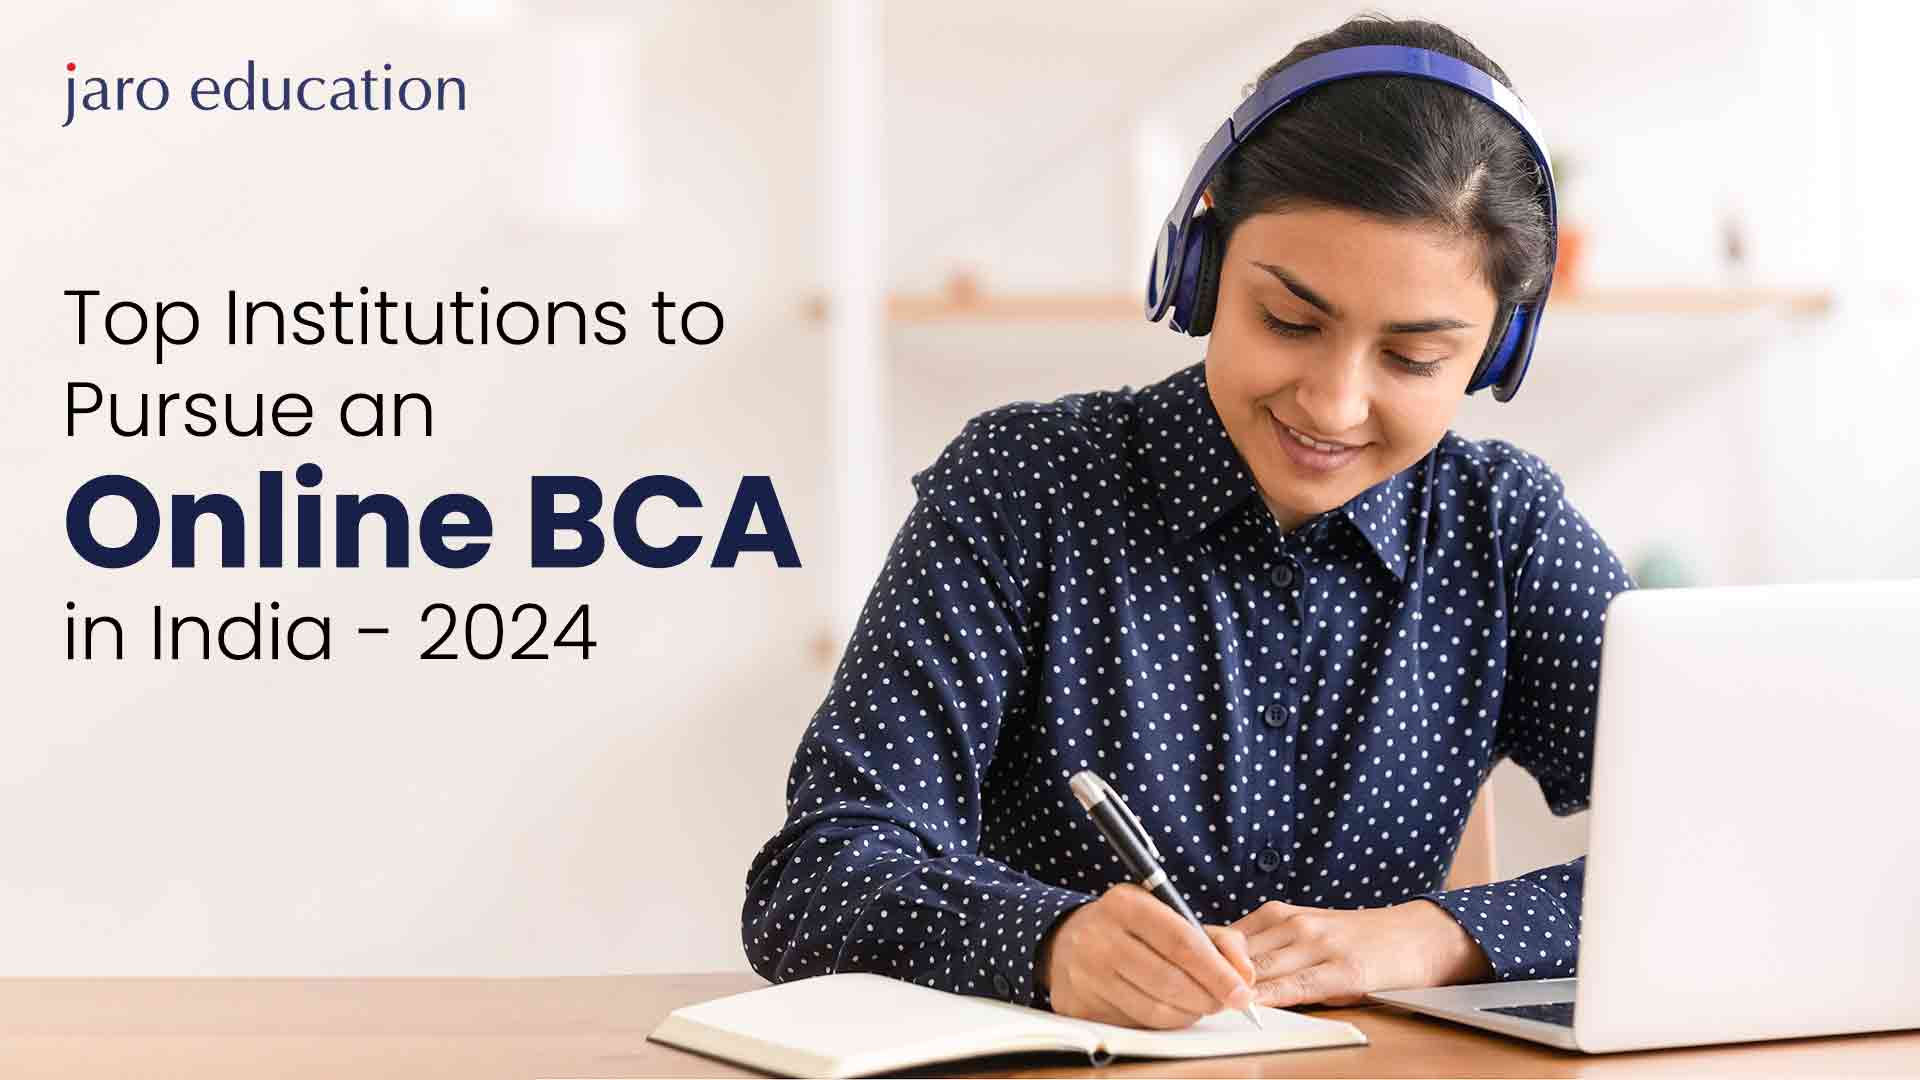 Top Institutions to Pursue an Online BCA in India 2024